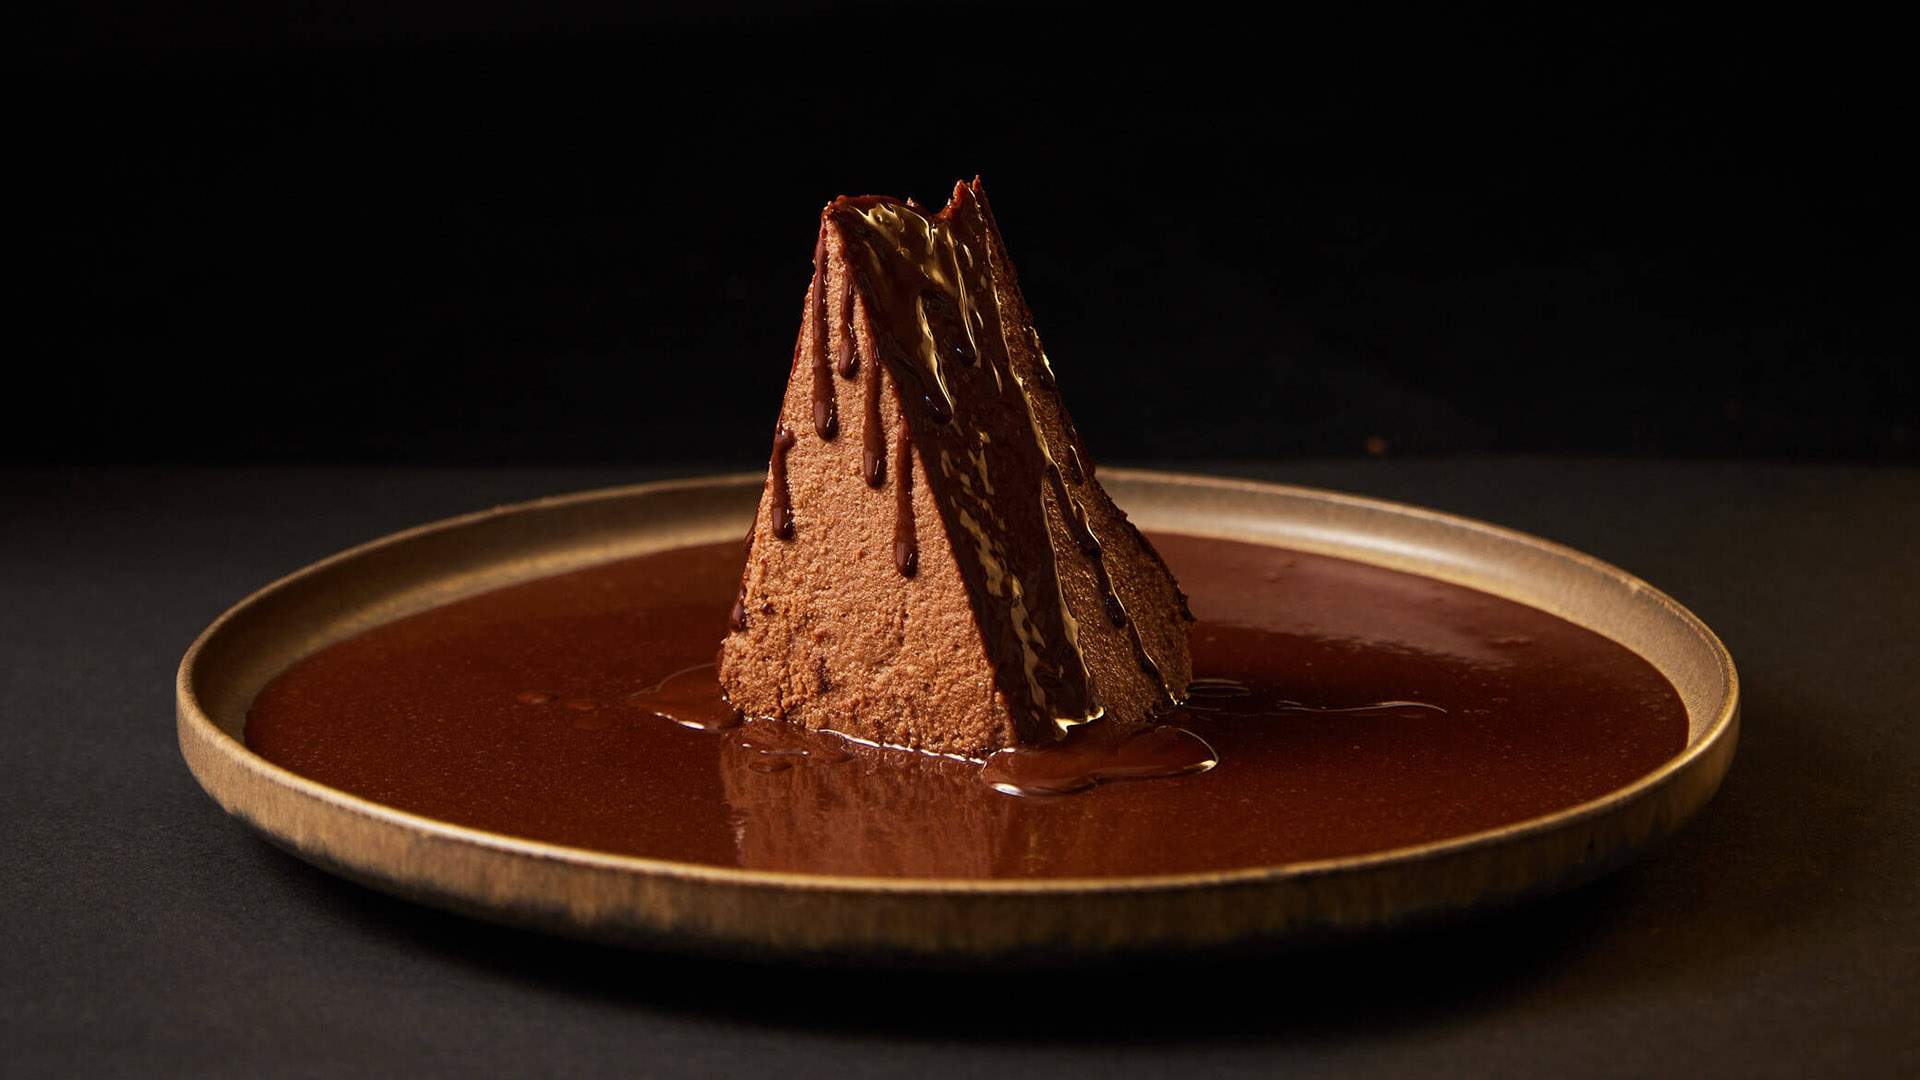 Online Bakery Black Cream Is Now Delivering Messina Chocolate Basque Cheesecakes to Your Door